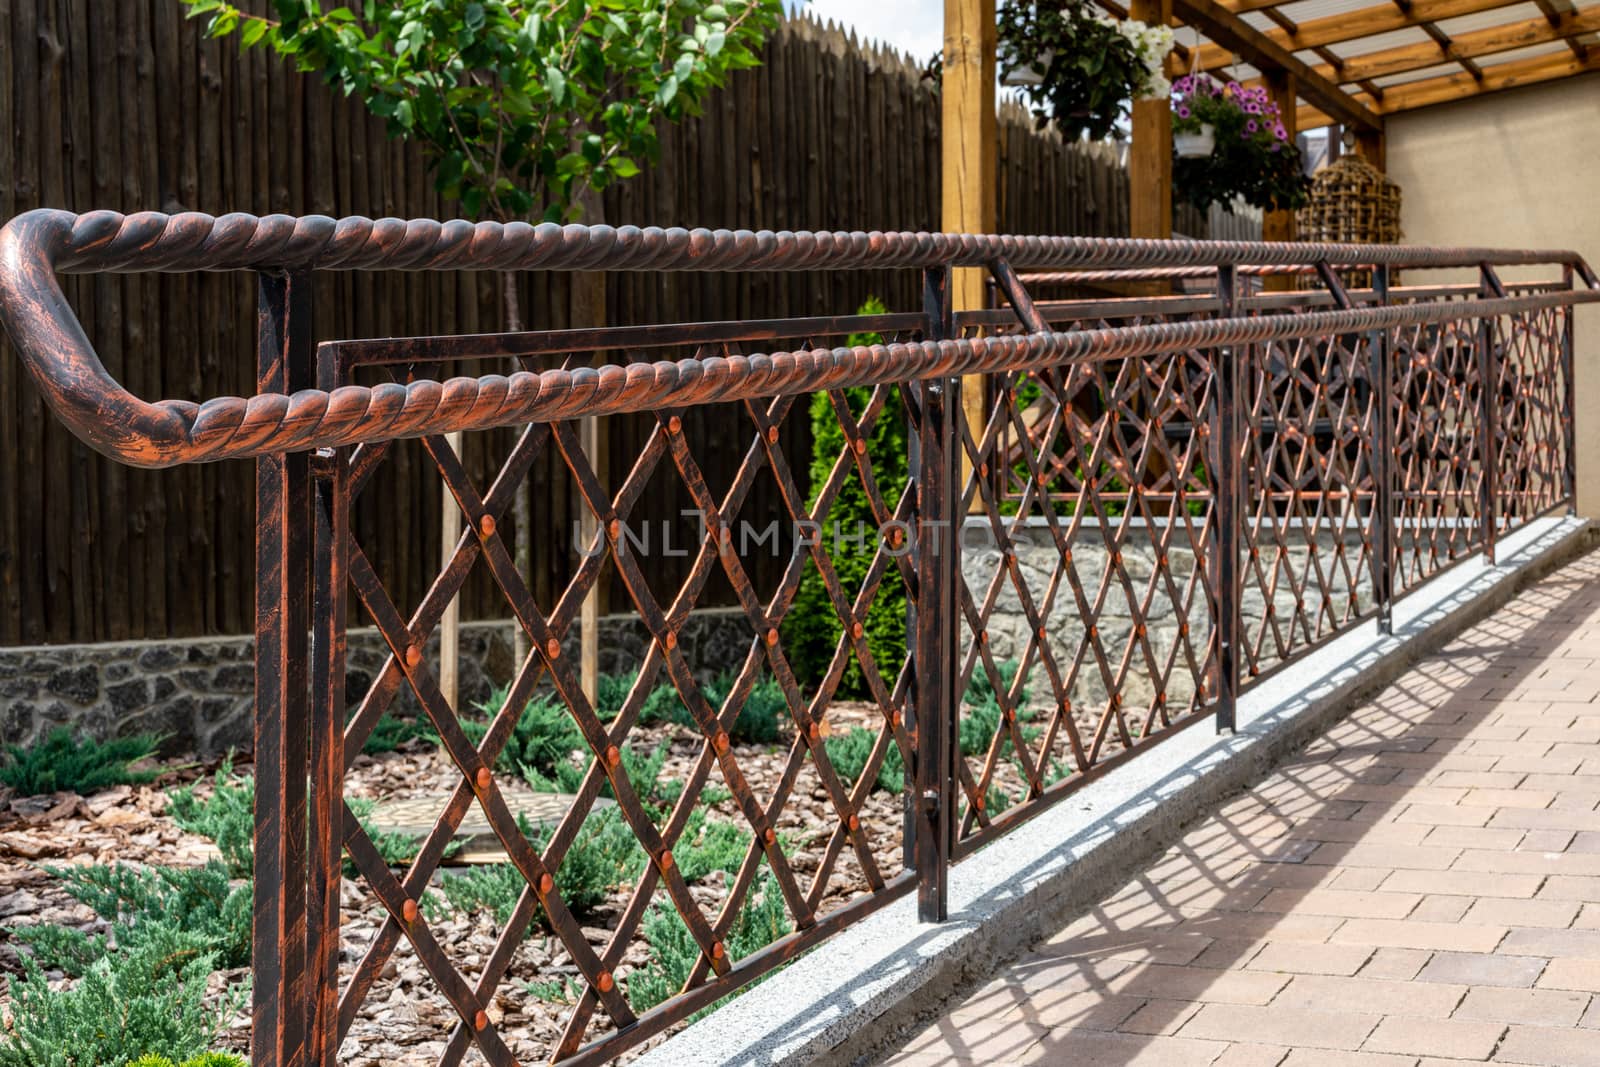 Forged metal products. Antique styling. Iron fence with mesh